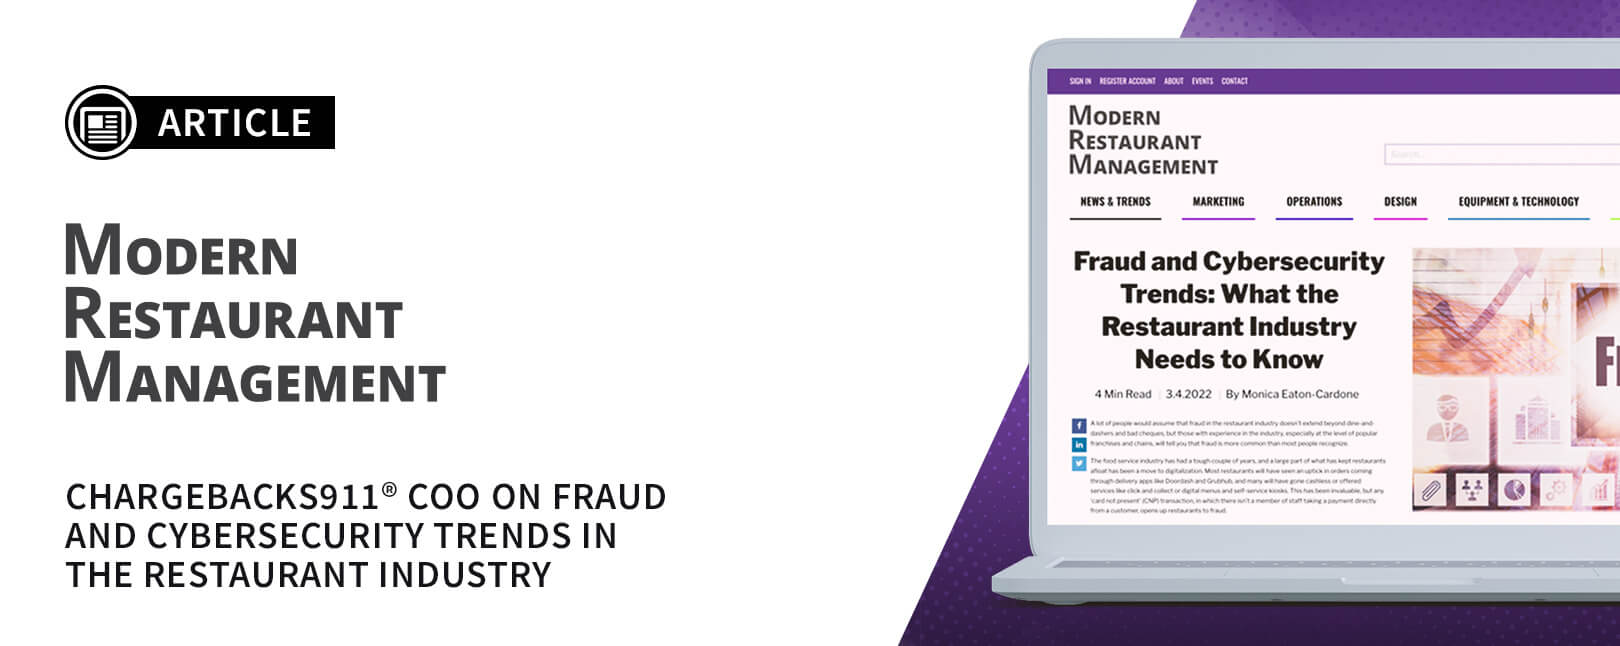 Fraud and Cybersecurity Trends: What the Restaurant Industry Needs to Know